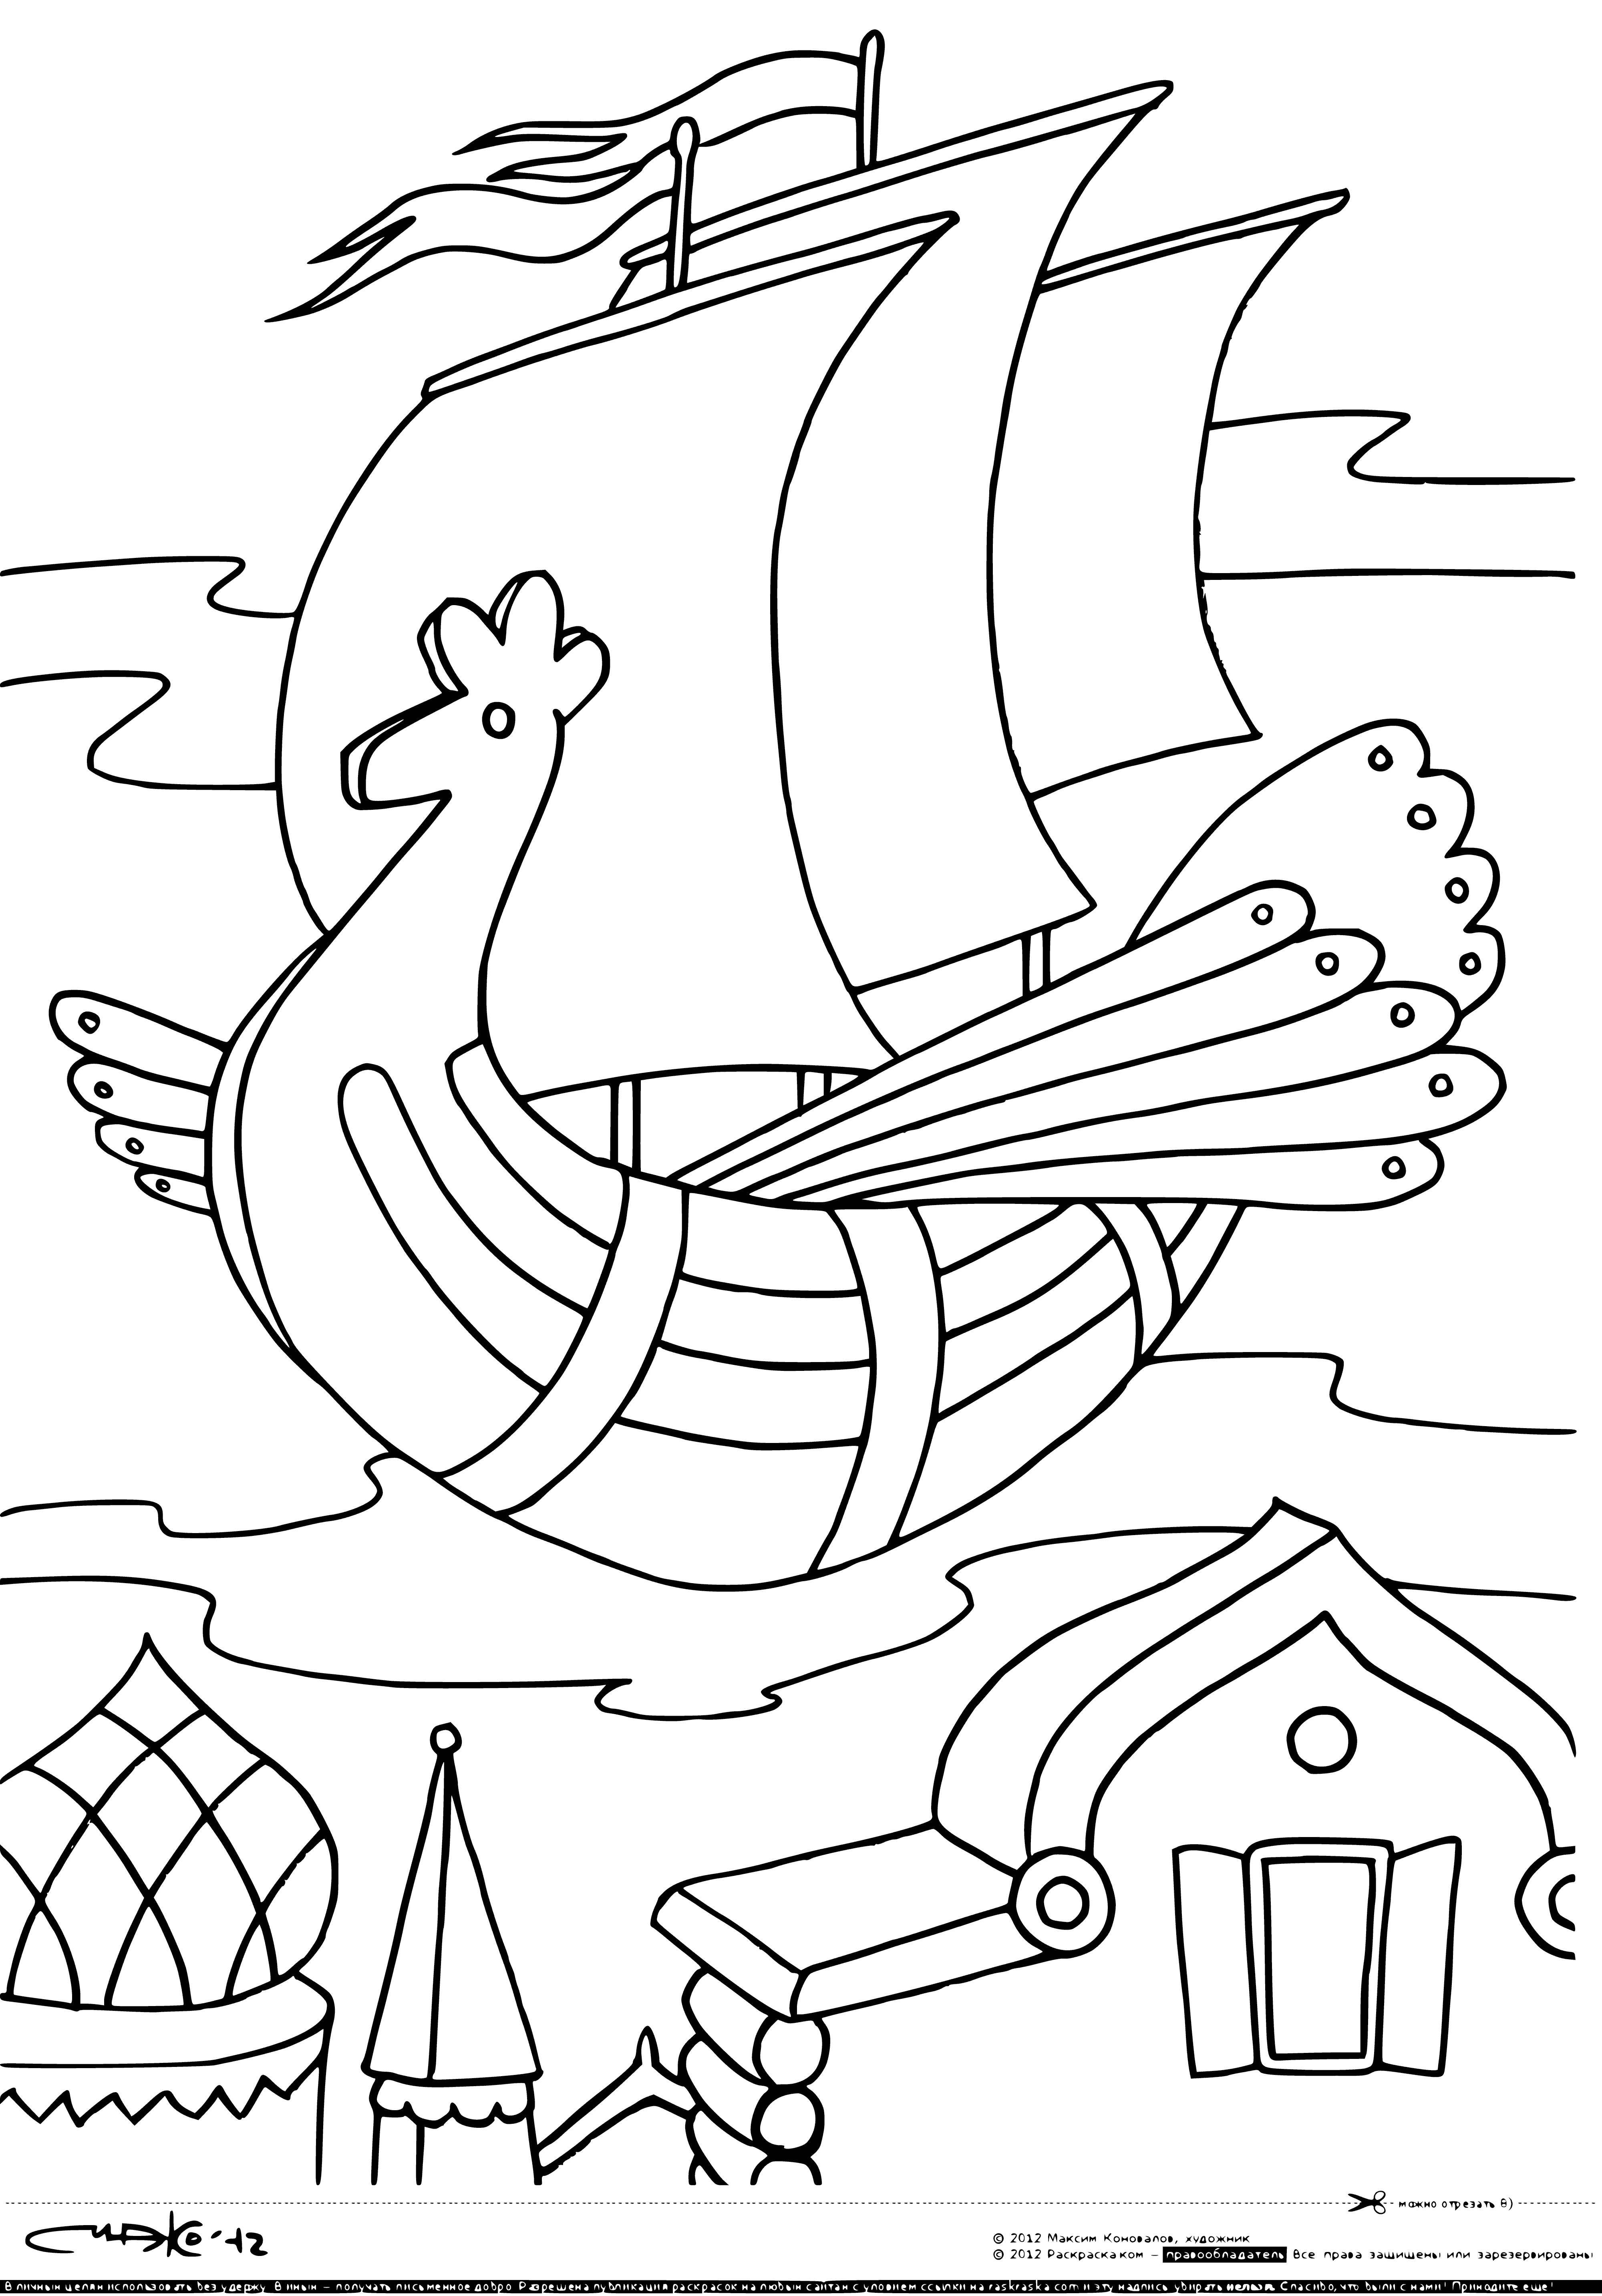 coloring page: A flying ship with two wings and three propellers soars through the sky.